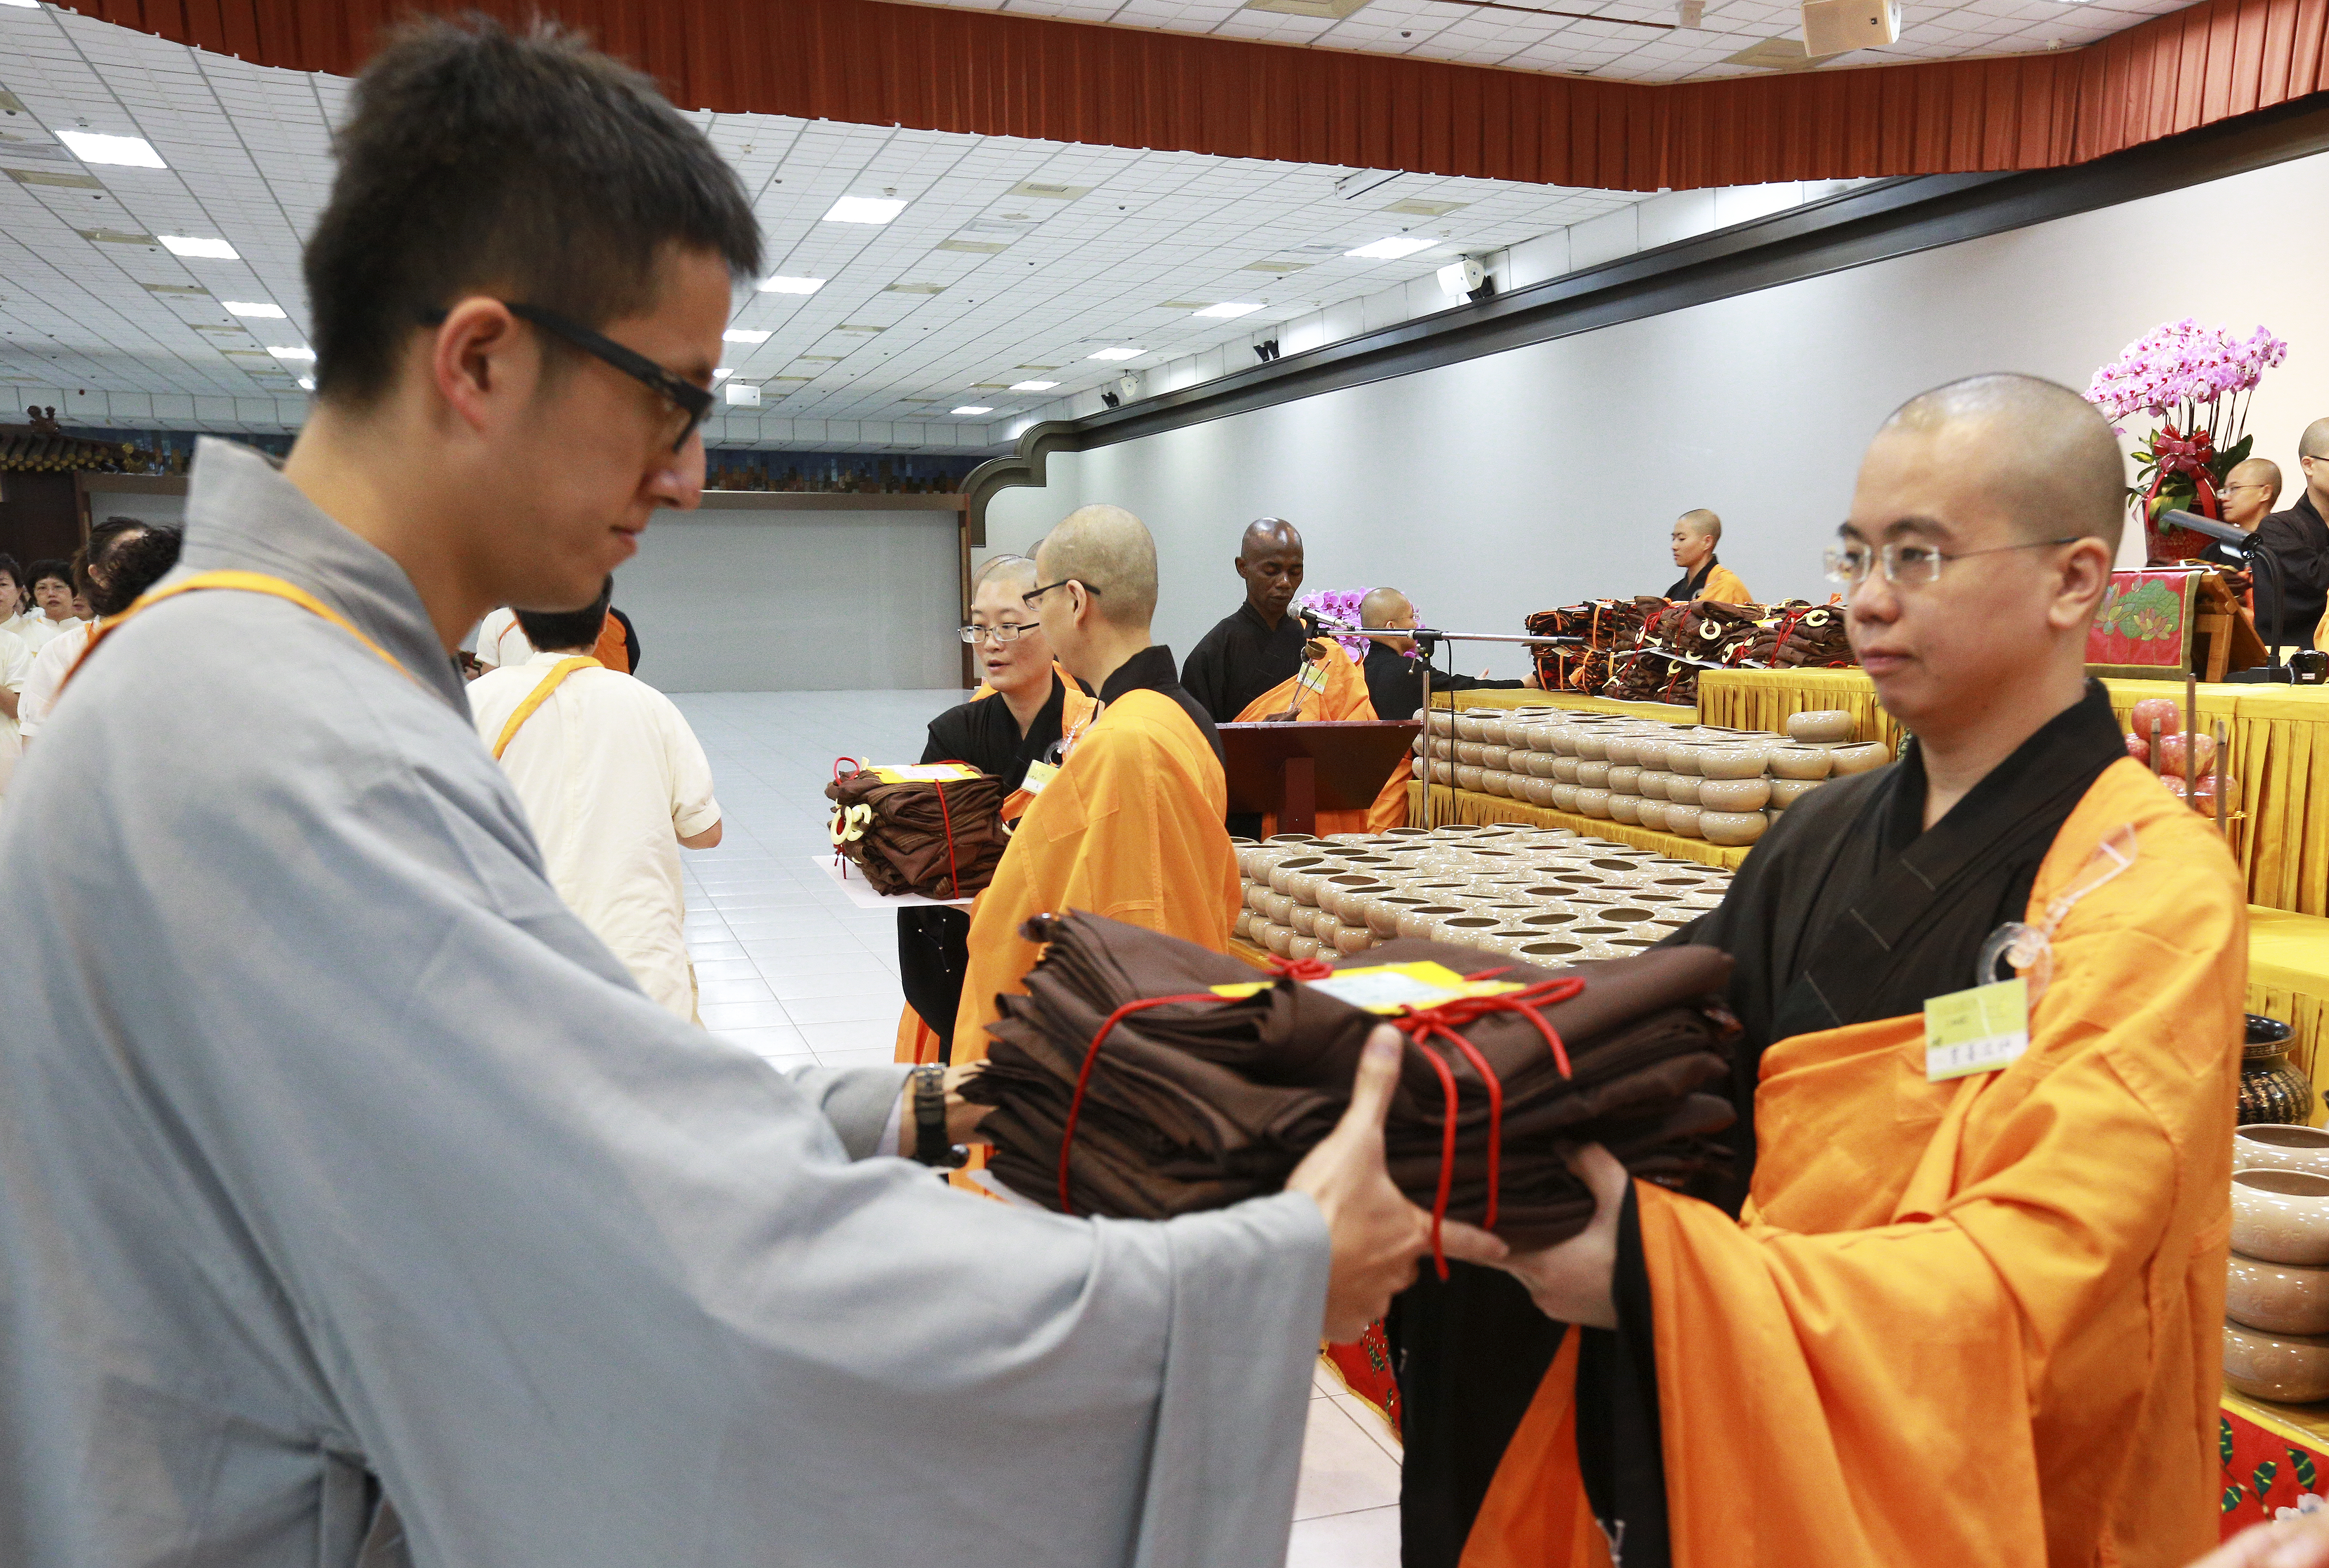 New preceptees are given robes, alms bowls, and sitting mats at the conferring the precepts ritual, Fo Guang Shan Headquarters, 2016. Photo by Life News Agency.